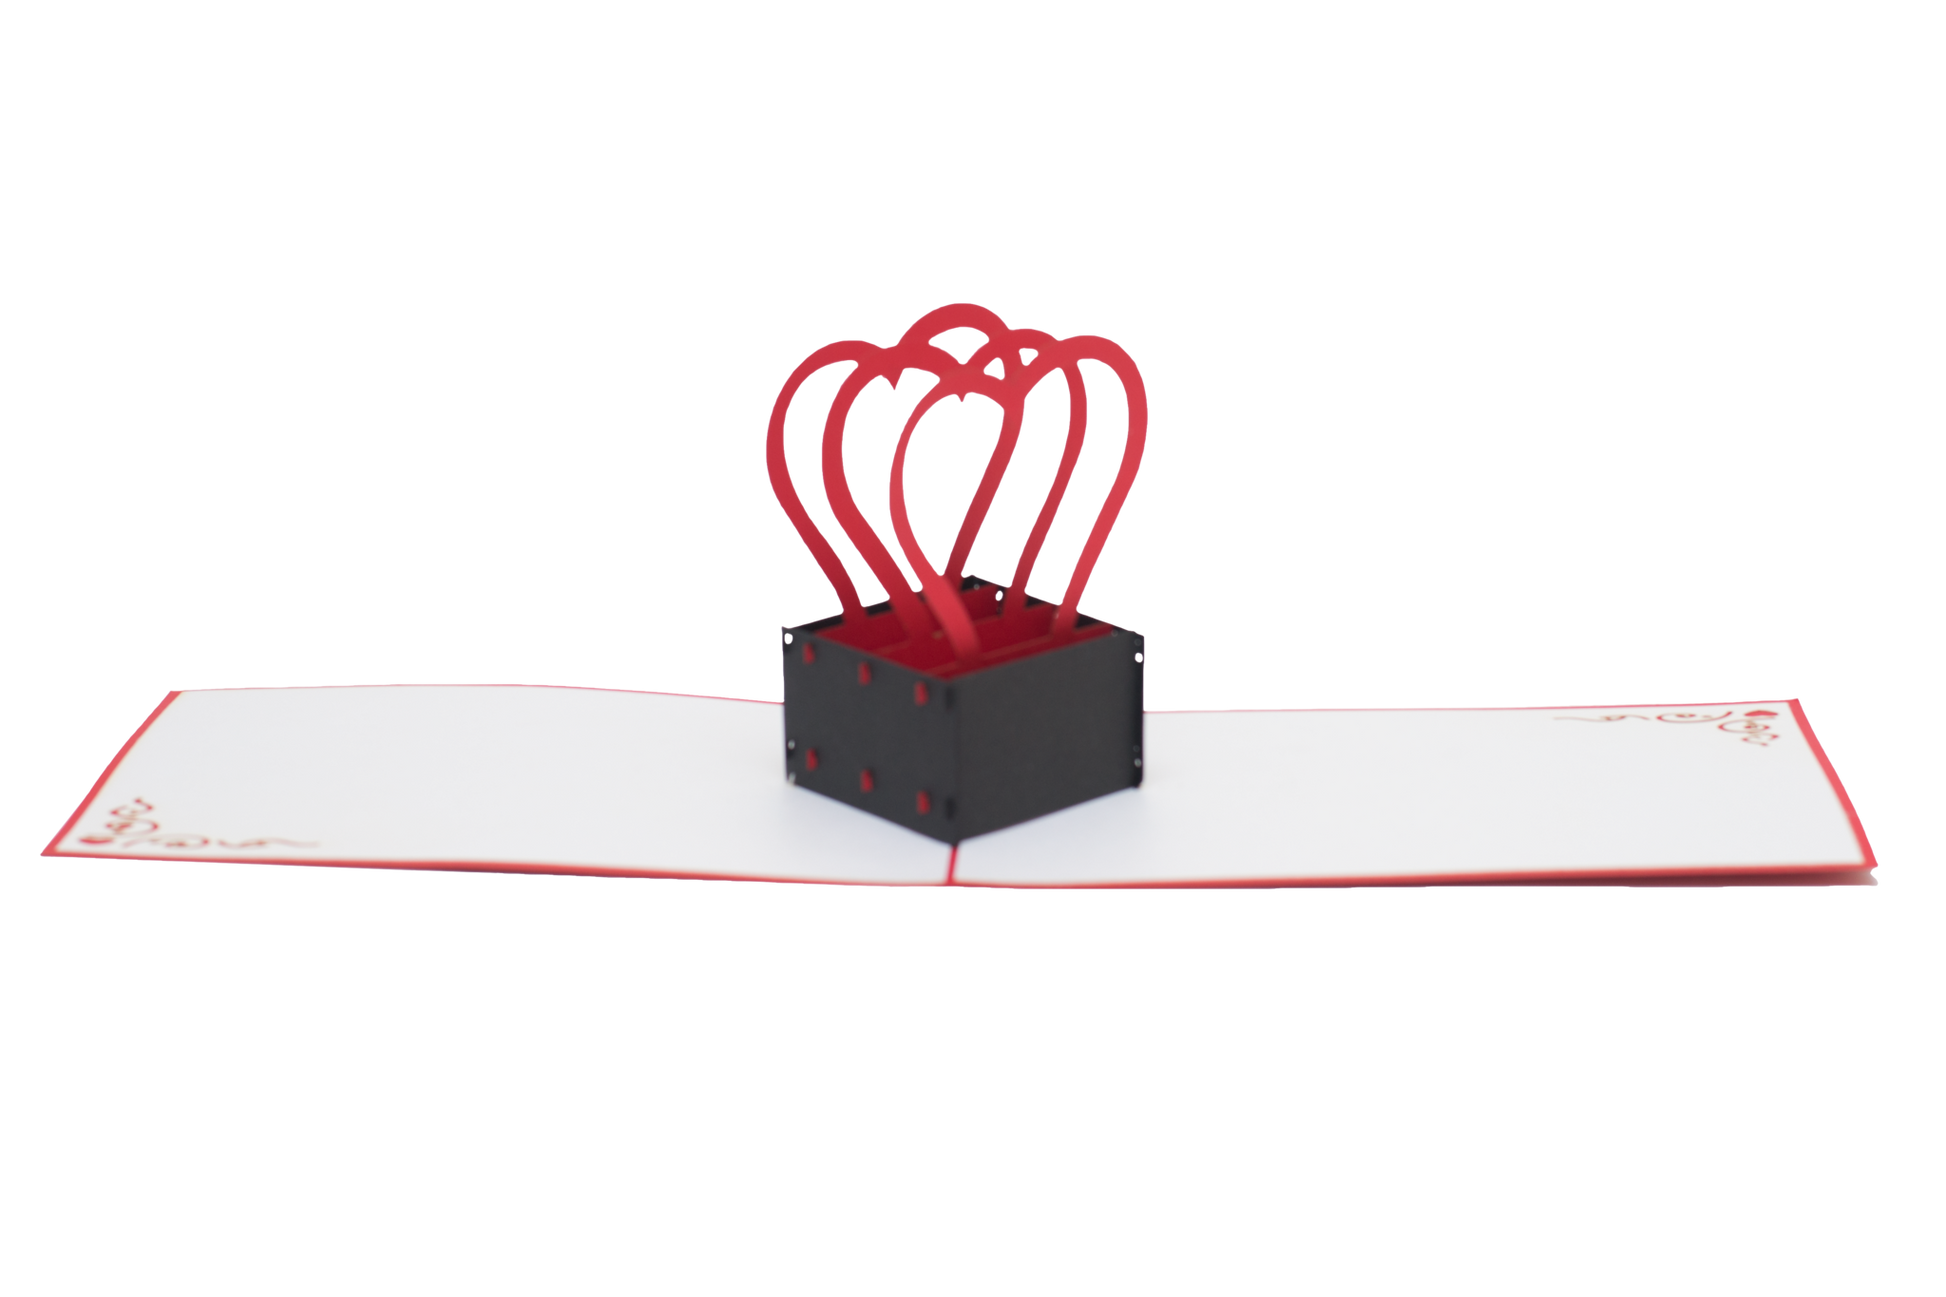 Pop-up card featuring three red heart-shaped arcs popping out of a black box in the middle